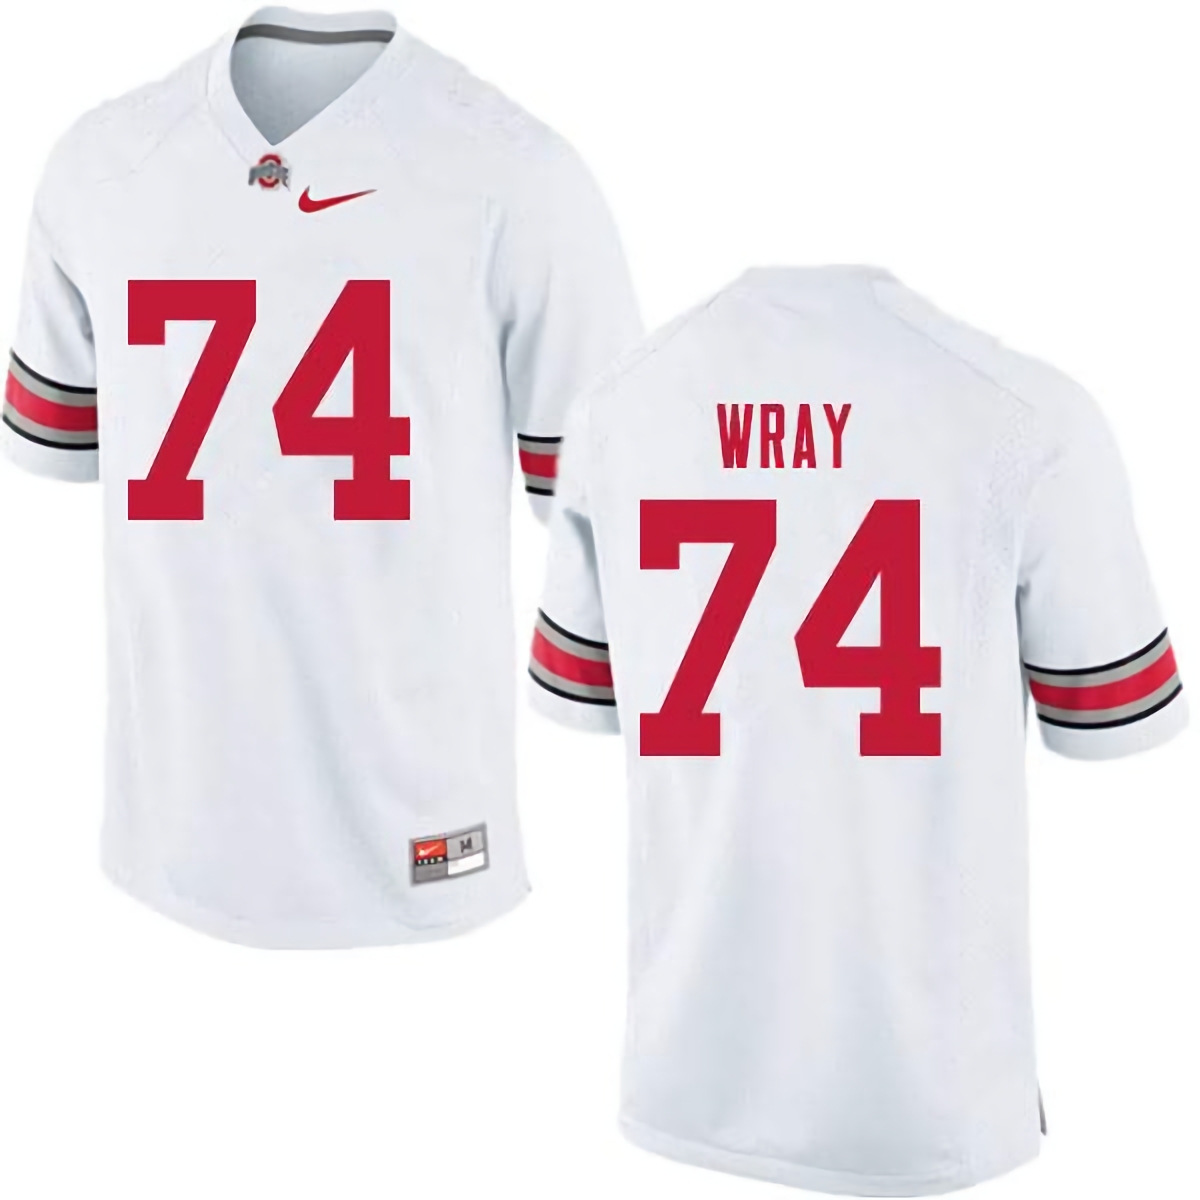 Max Wray Ohio State Buckeyes Men's NCAA #74 Nike White College Stitched Football Jersey BQT7056ZT